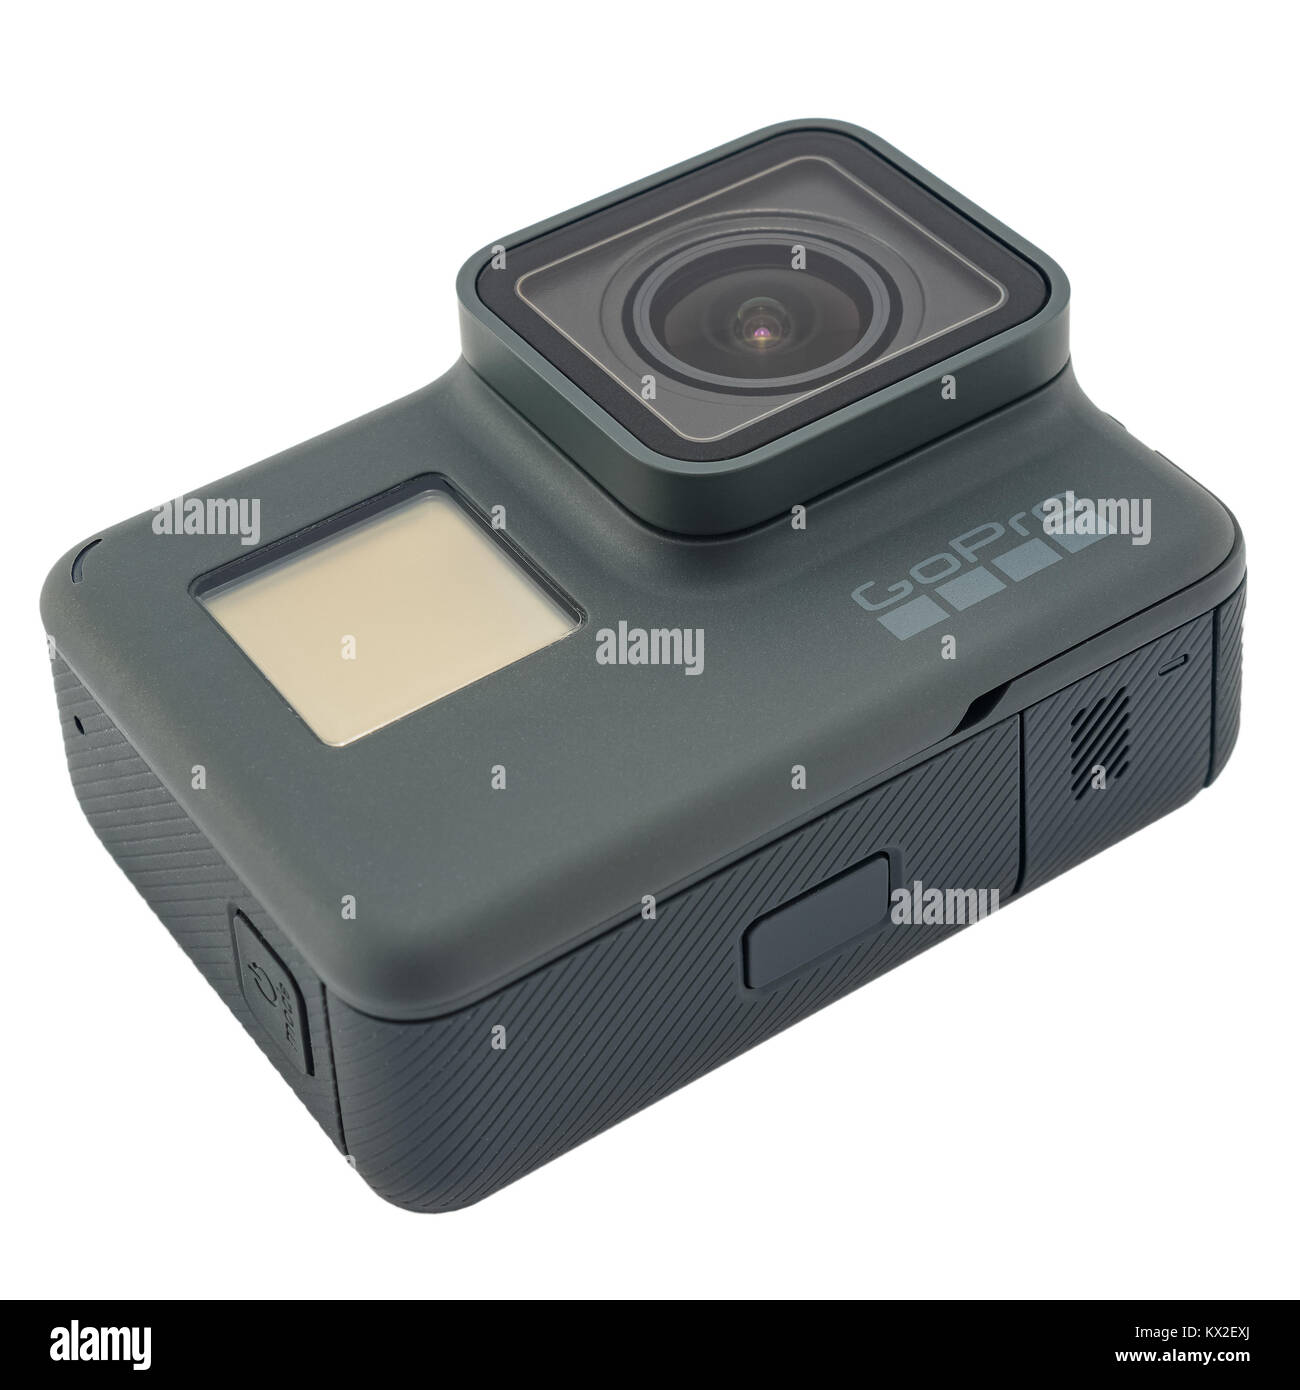 RIGA, LATVIA - NOVEMBER 25, 2017: GoPro HERO 6 Black. Supports 4k Ultra HD video up to 60 fps and 1080p up to 240 fps. Brand new waterproof action cam Stock Photo